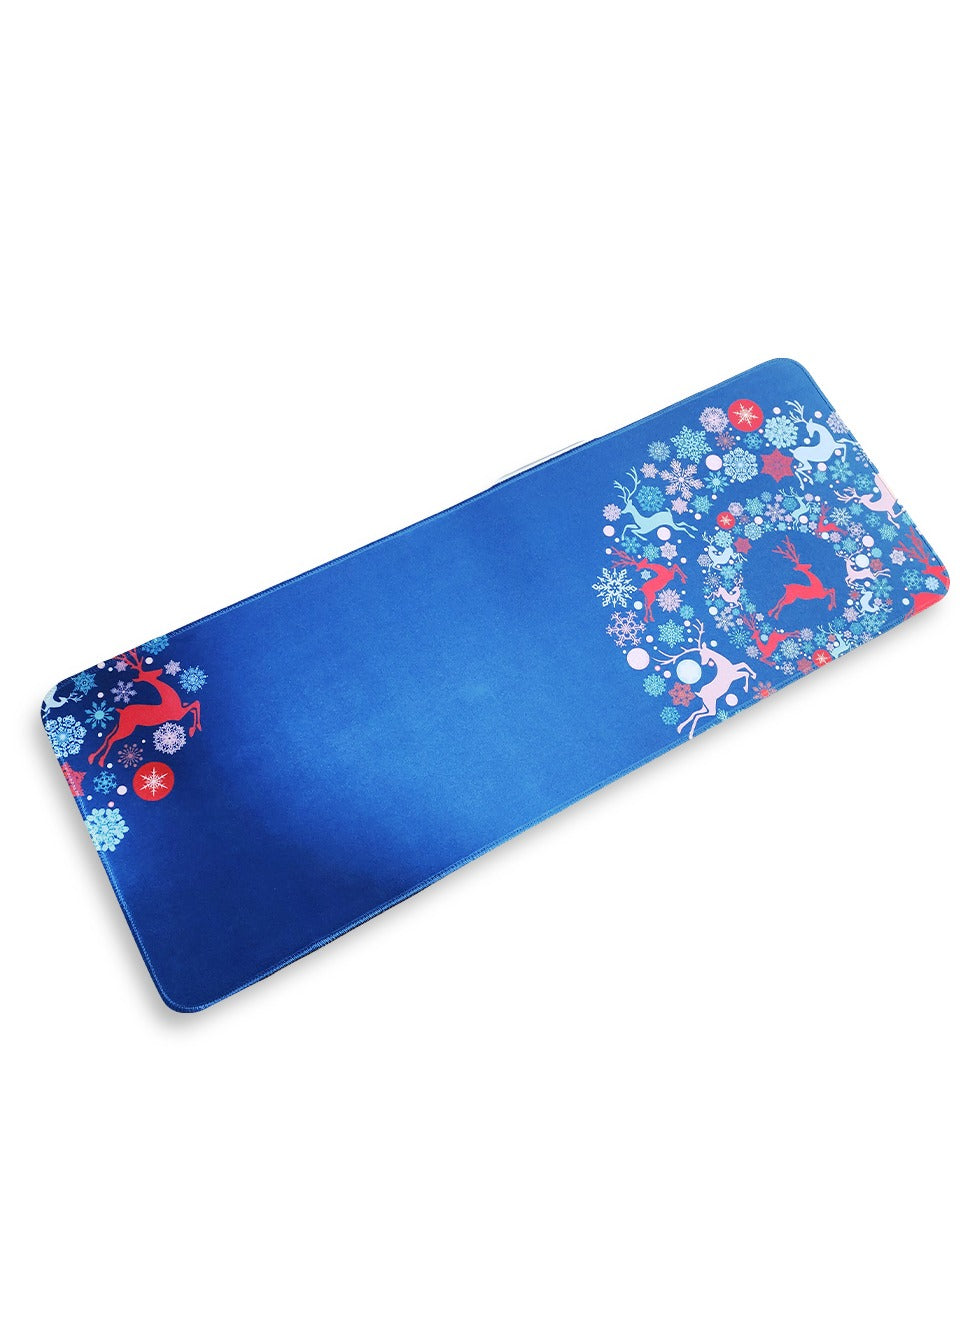 Gaming Mouse Pad -Colour Designs- Size 80X30 CM - Stitched Edges Anti-slip rubber base - Optimized for all mouse sensitivities and sensors - Model Mix Pads KK19